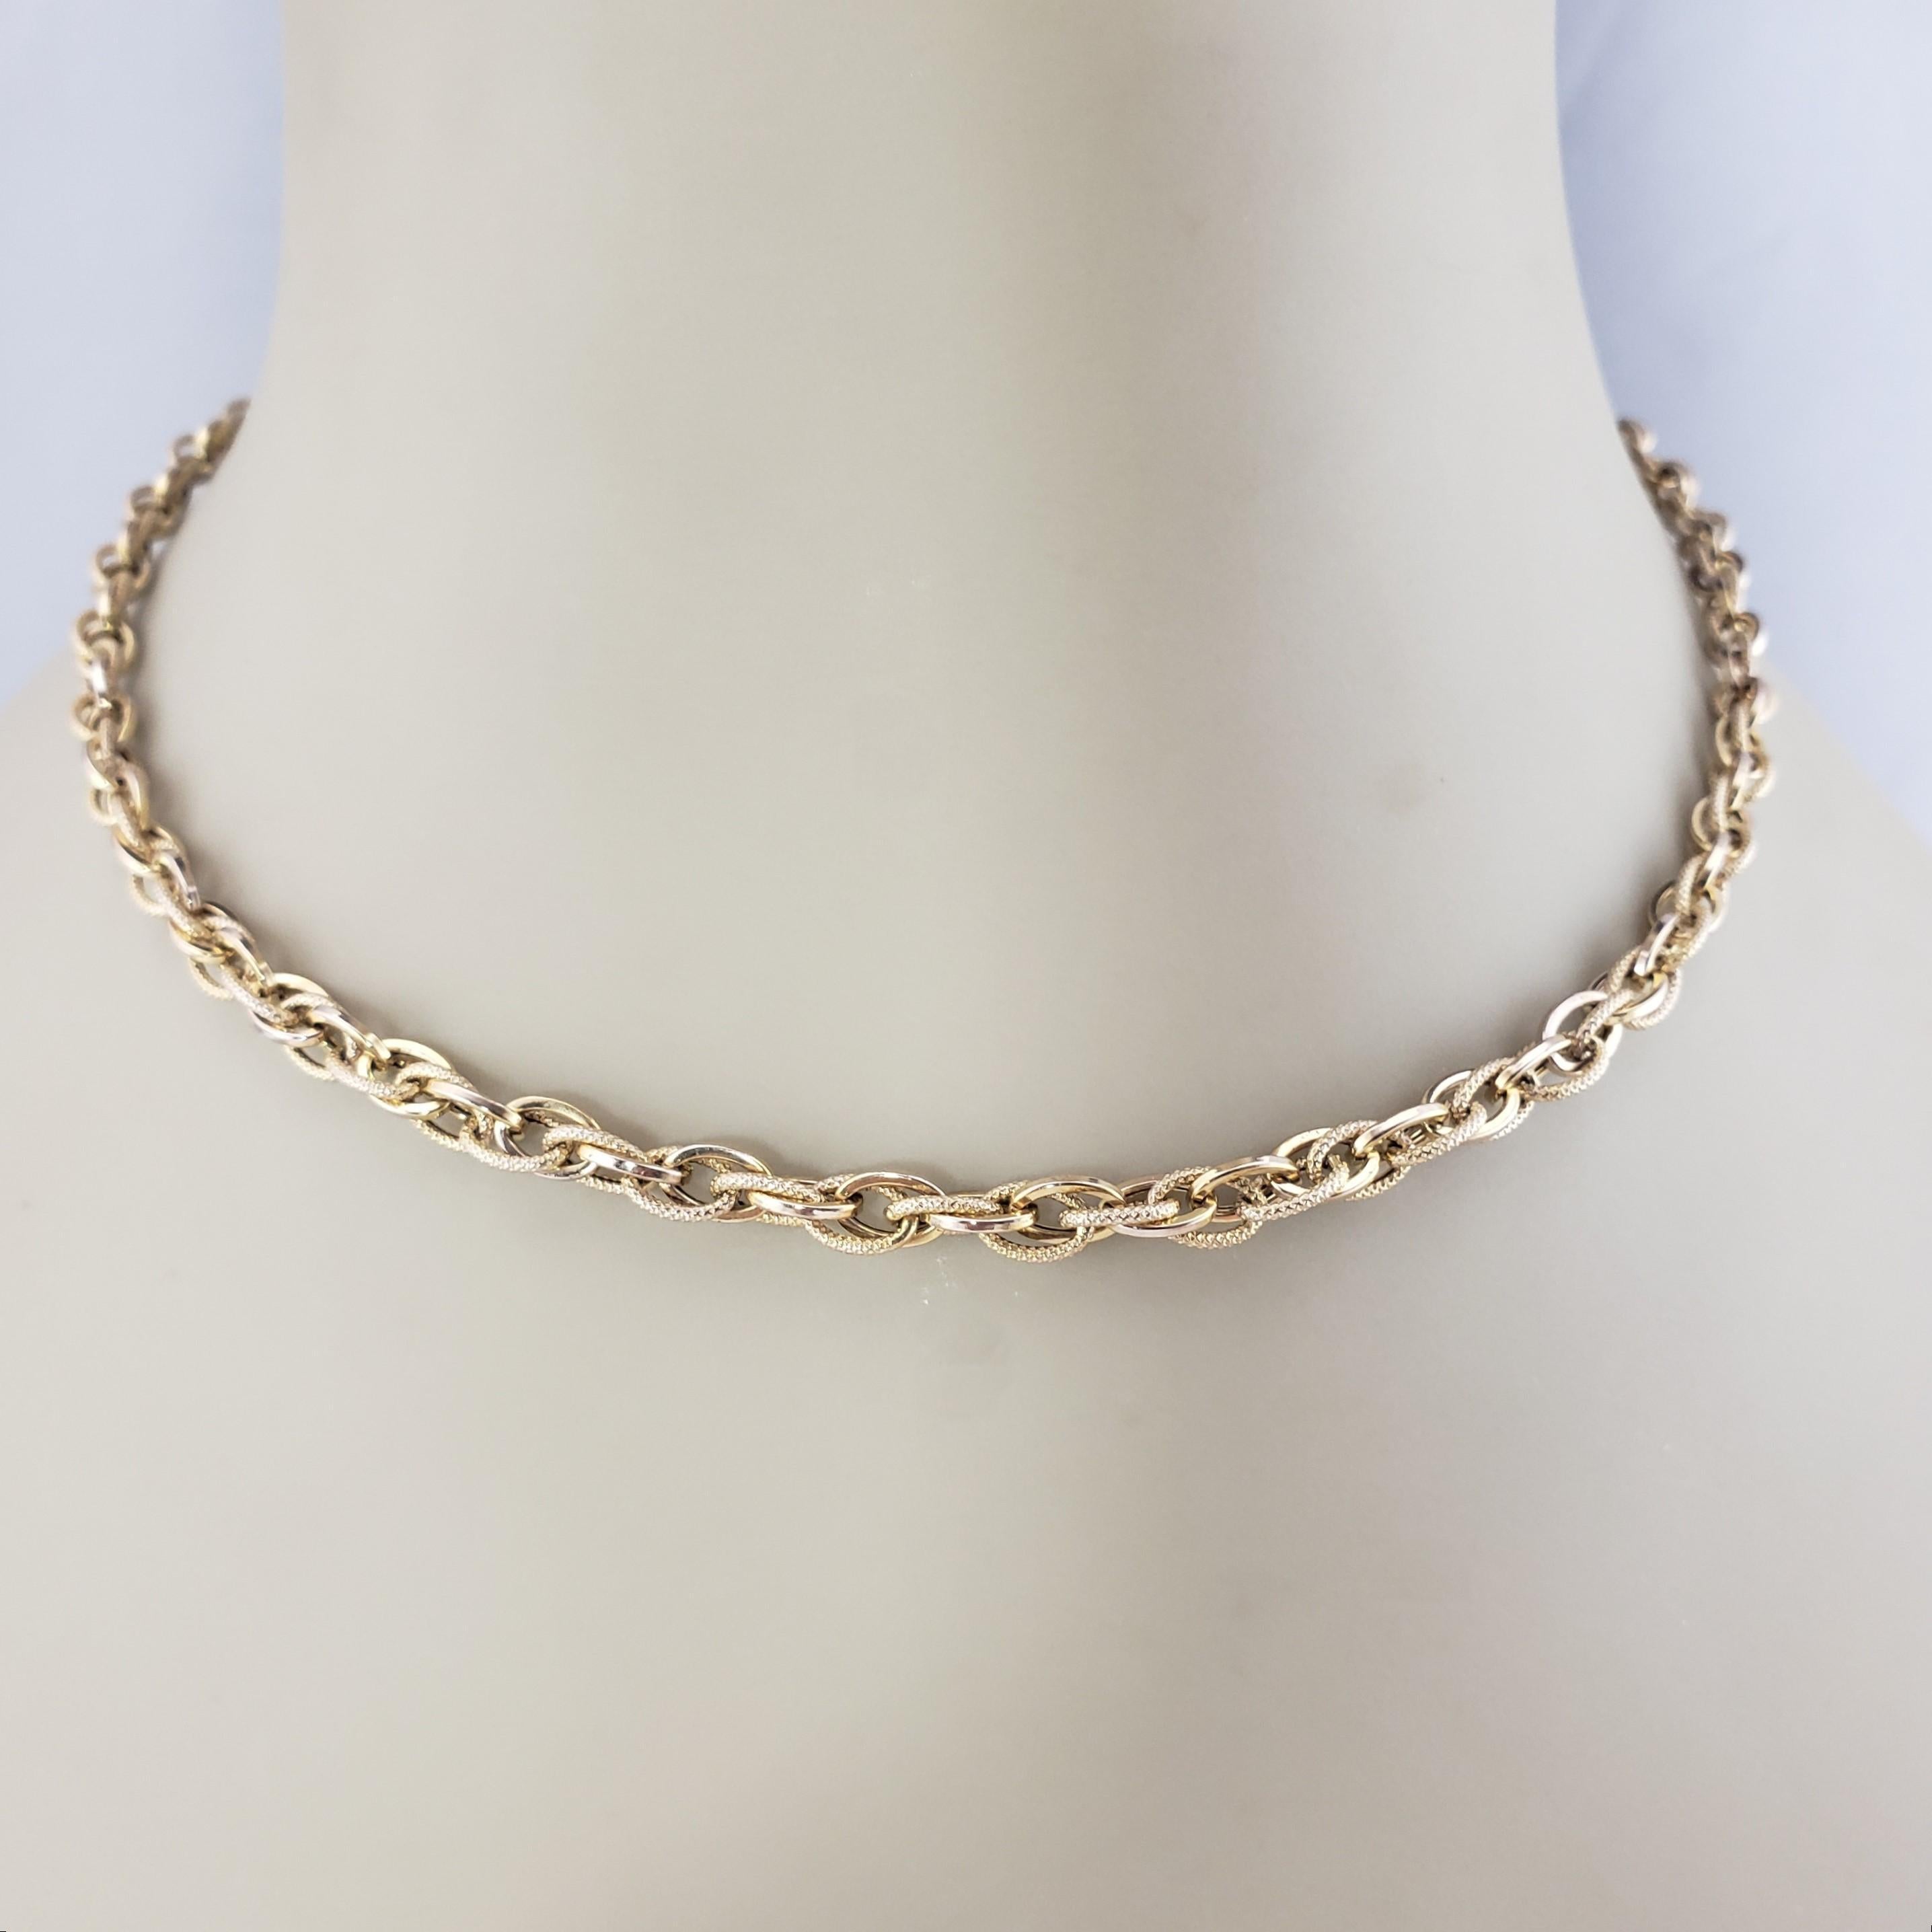  14 Karat Yellow Gold Cable Chain Necklace #15528 For Sale 2